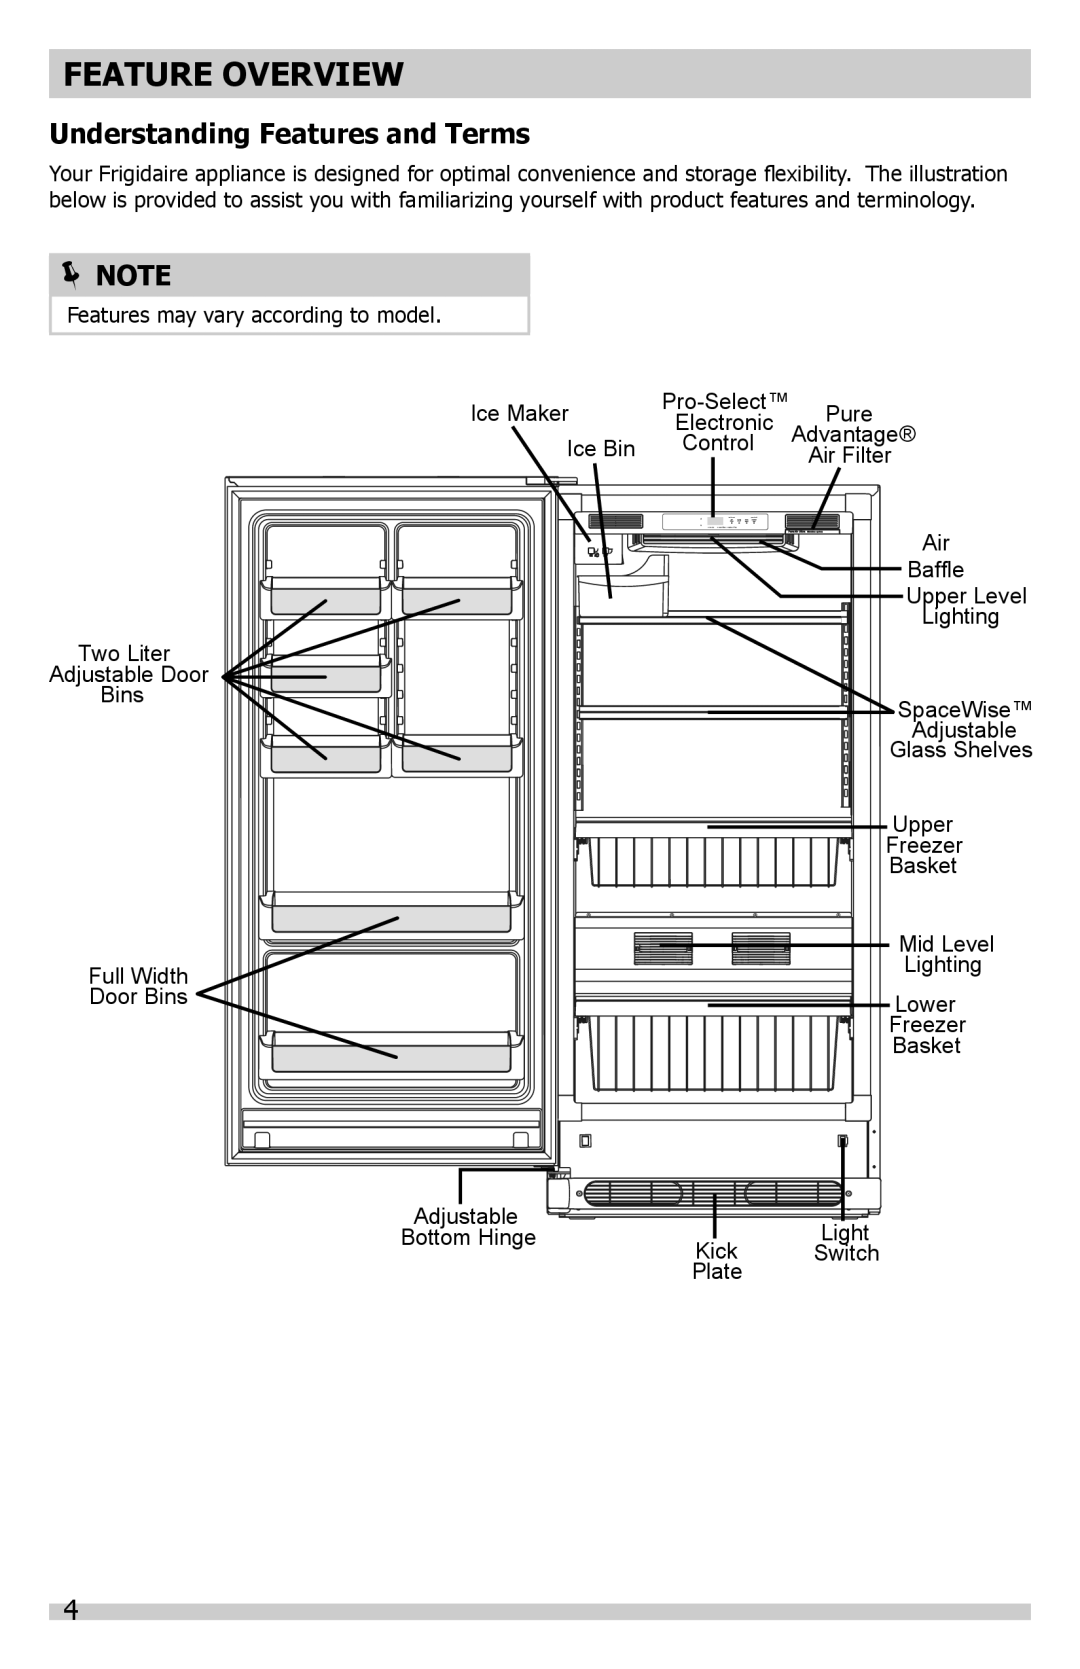 Frigidaire A01060901 manual Feature Overview, Understanding Features and Terms,  Note 